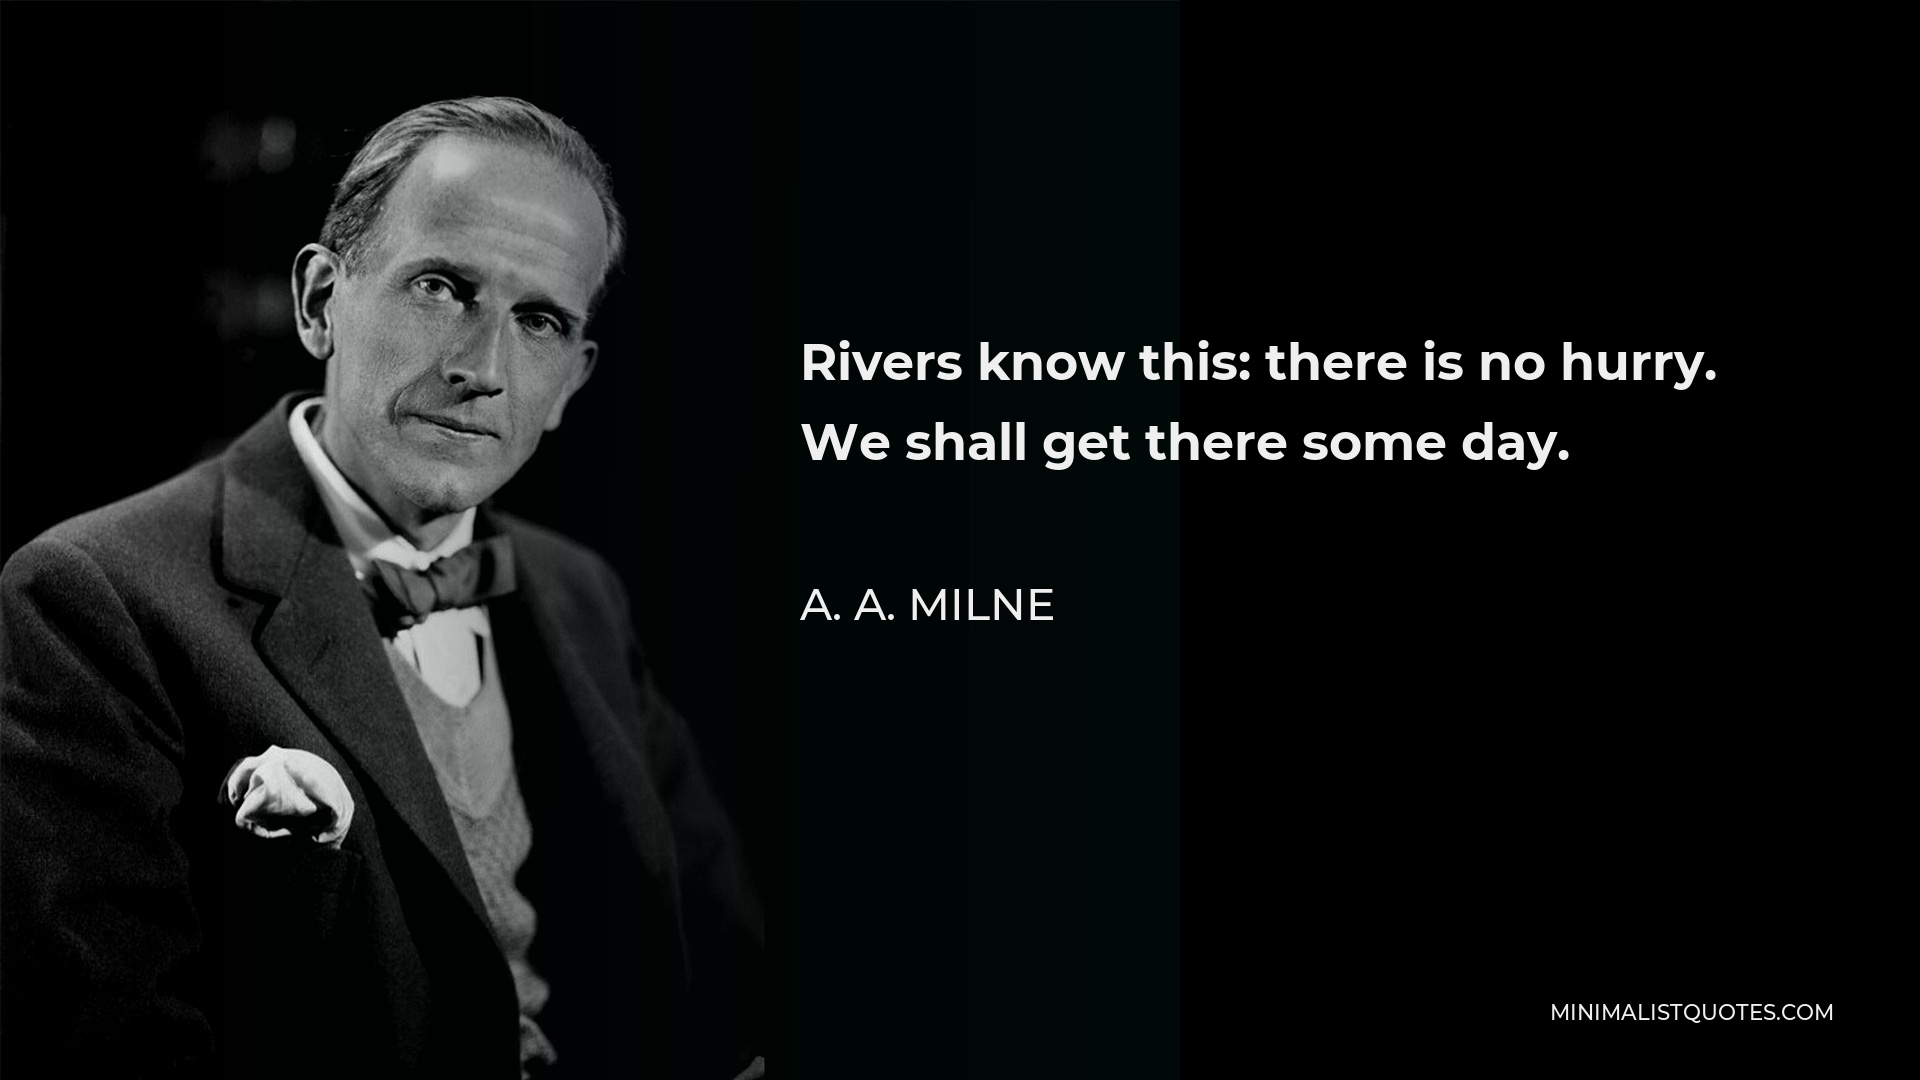 A. A. Milne Quote - Rivers know this: there is no hurry. We shall get there some day.